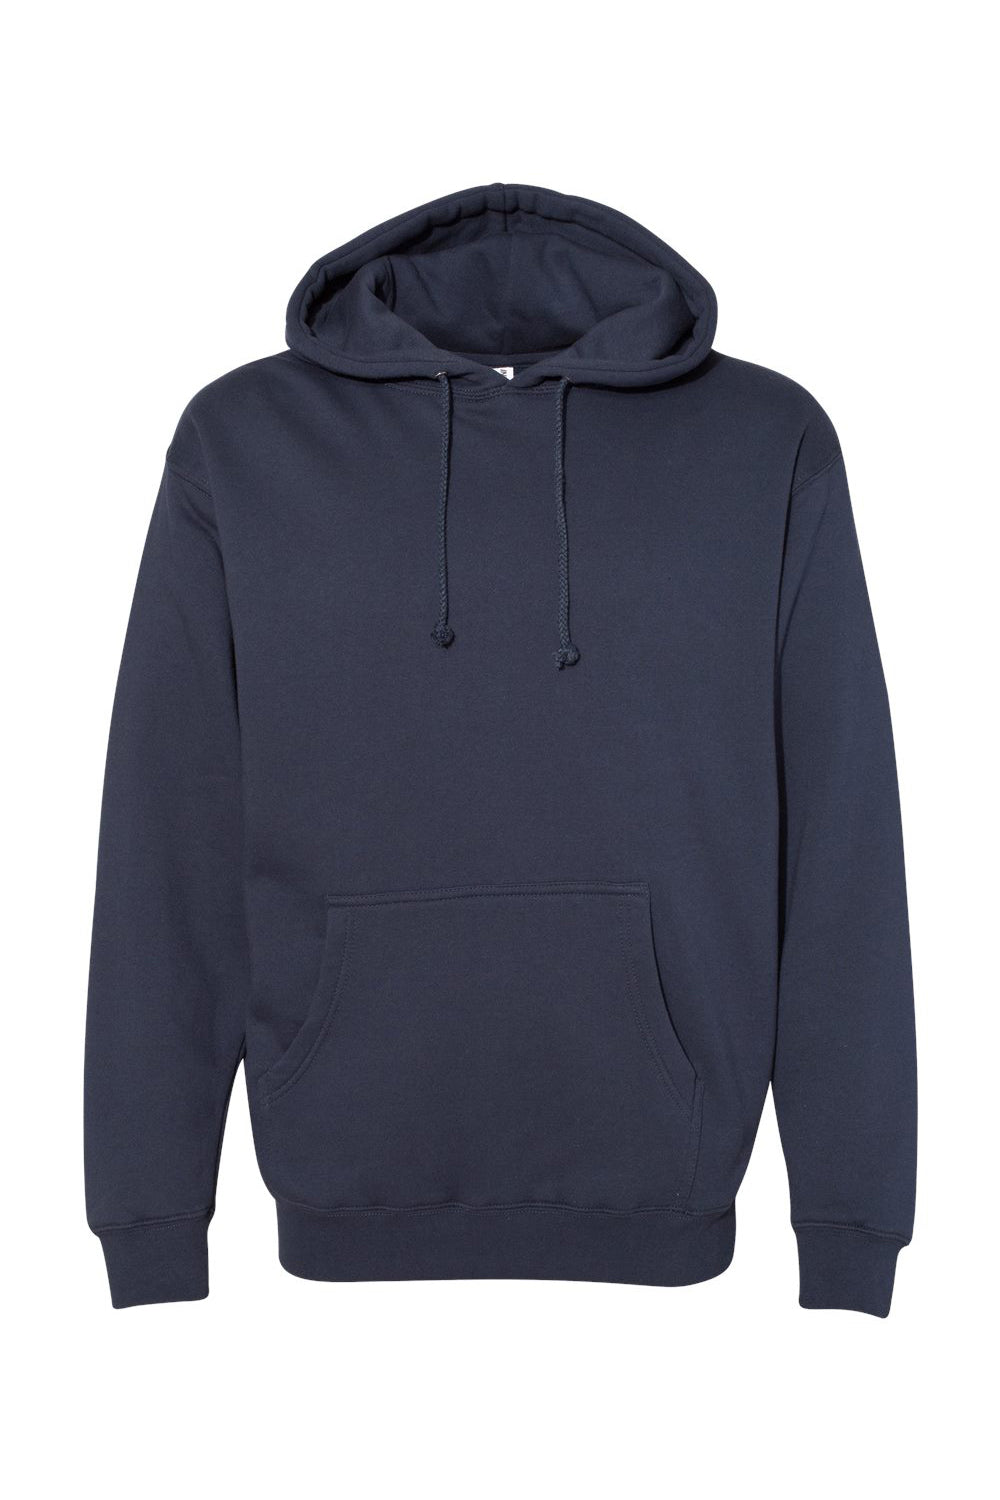 Independent Trading Co. IND4000 Mens Hooded Sweatshirt Hoodie Slate Blue Flat Front